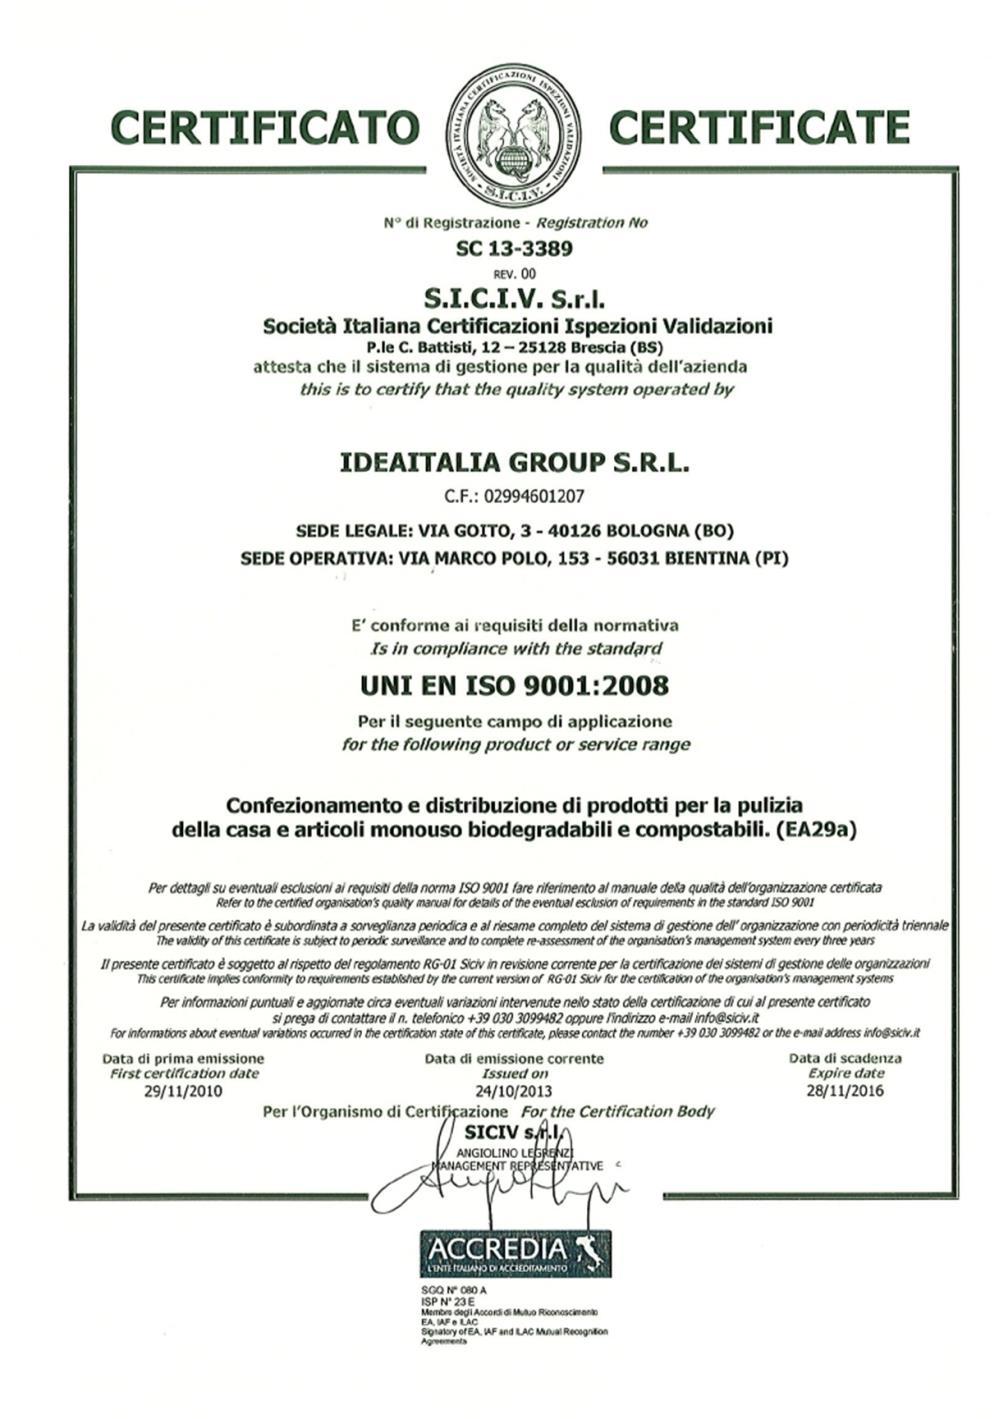 Our company has been awarded ISO 9001:2008